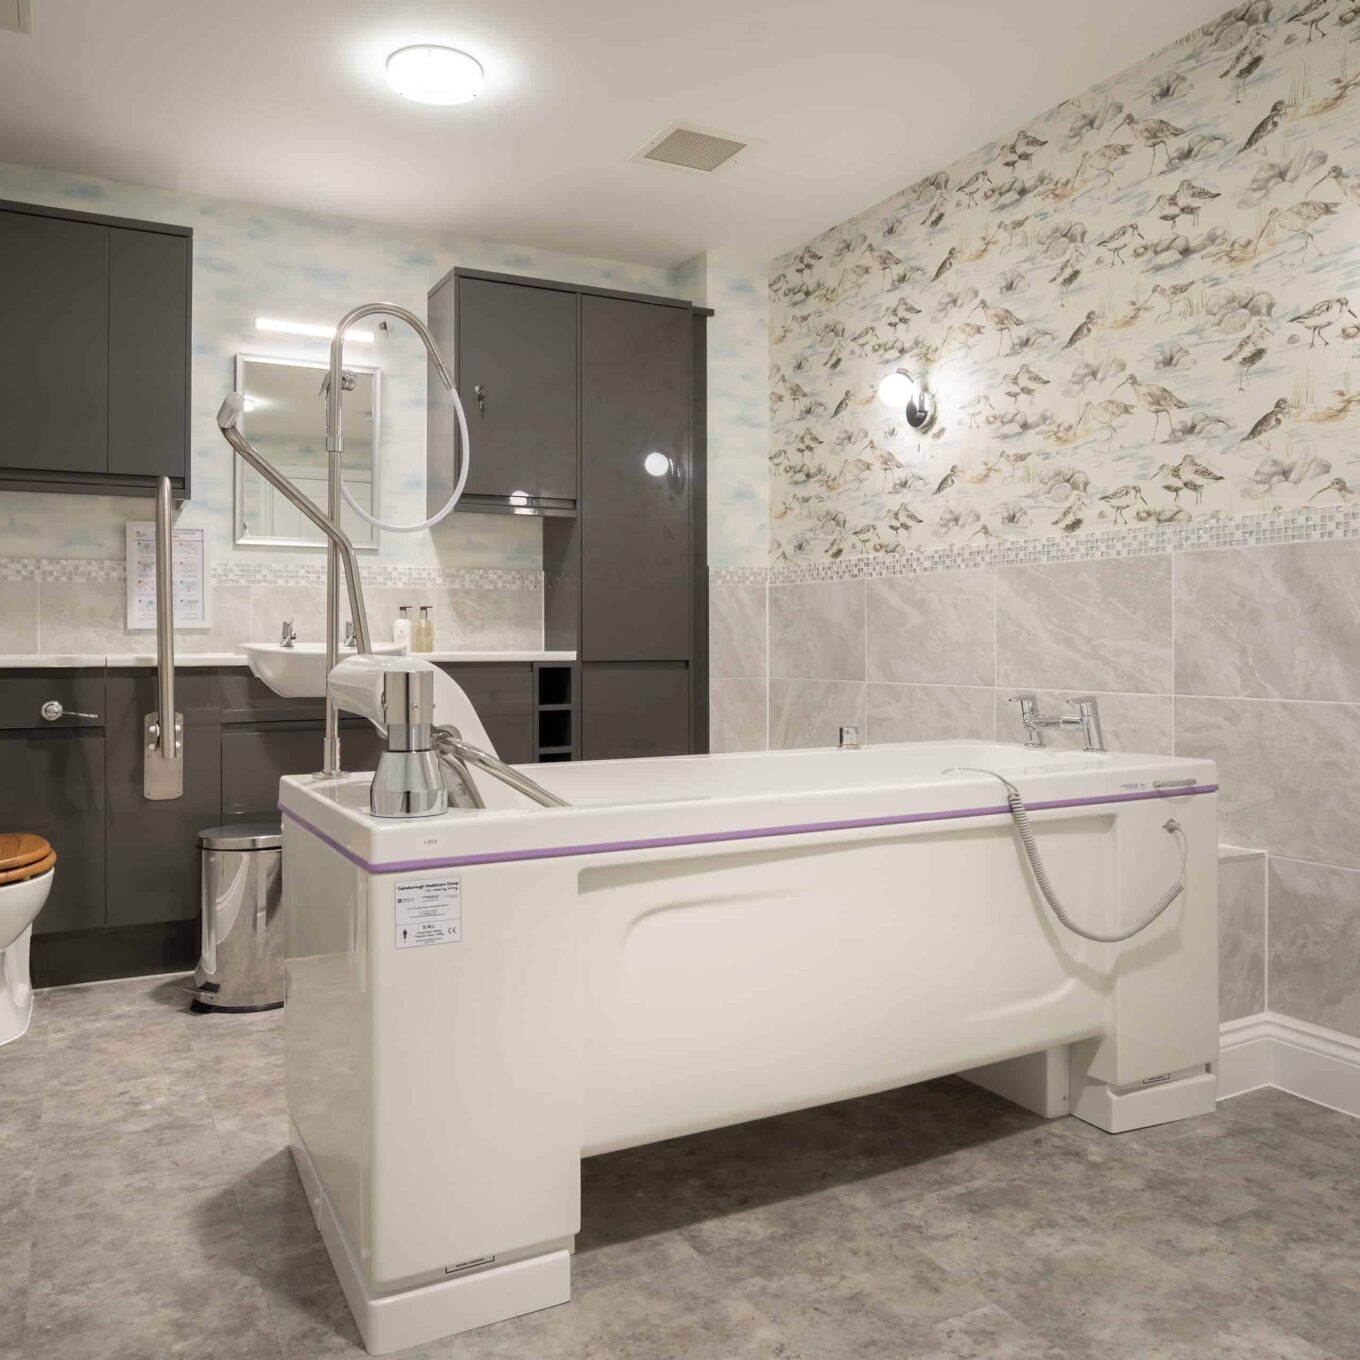 Large bathroom with bath inside room at Elmbook Court Care Home in Wantage, Oxfordshire